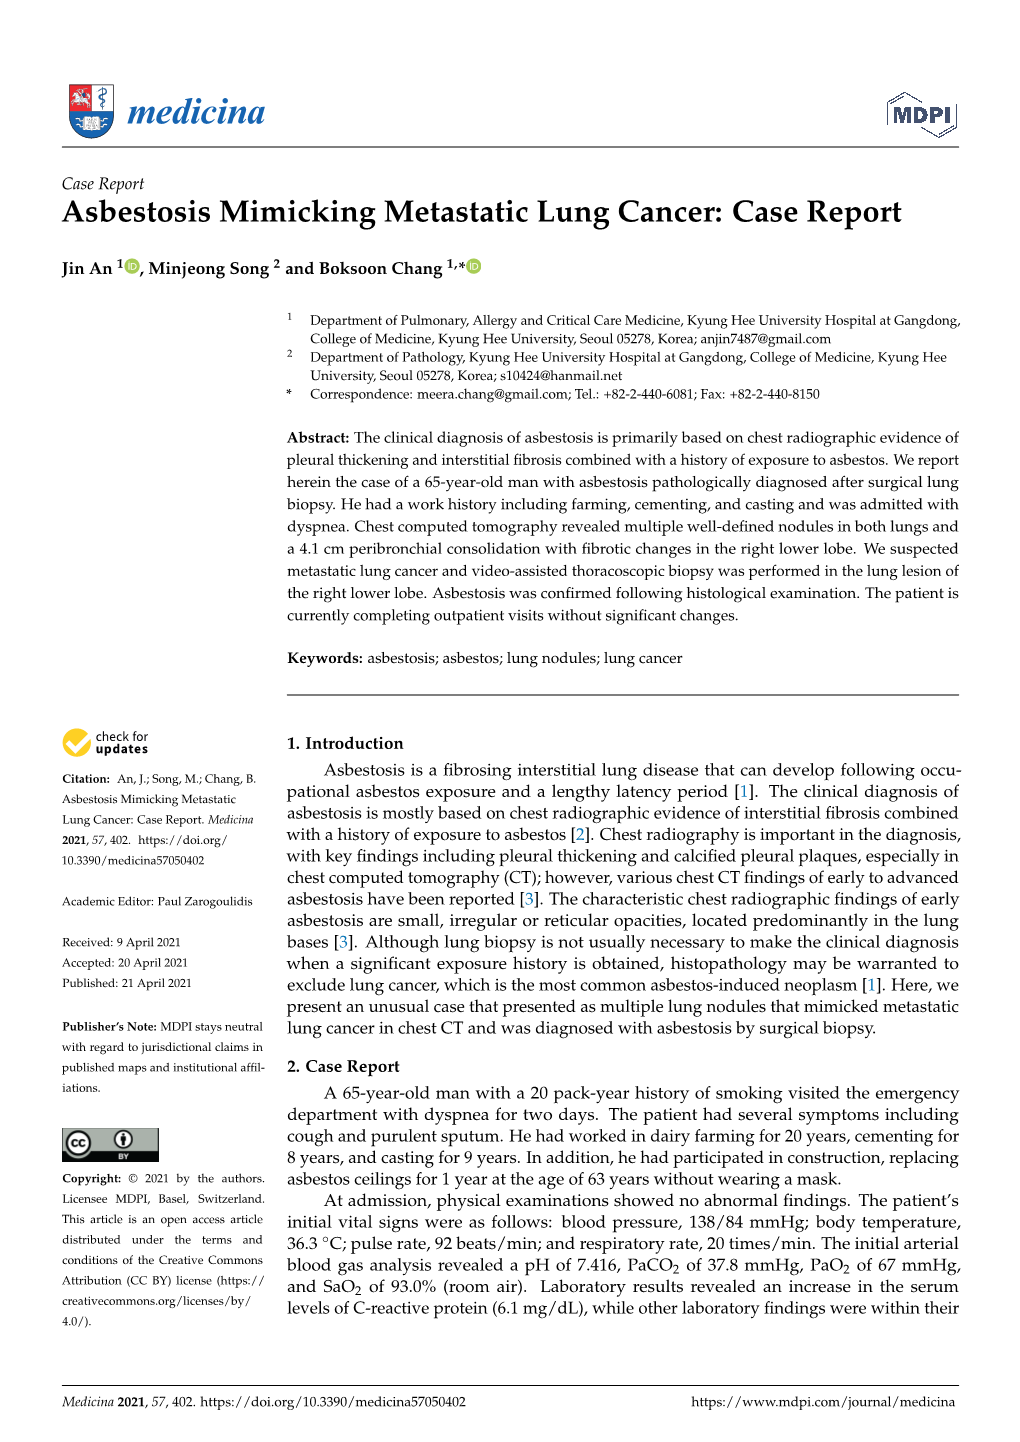 Asbestosis Mimicking Metastatic Lung Cancer: Case Report